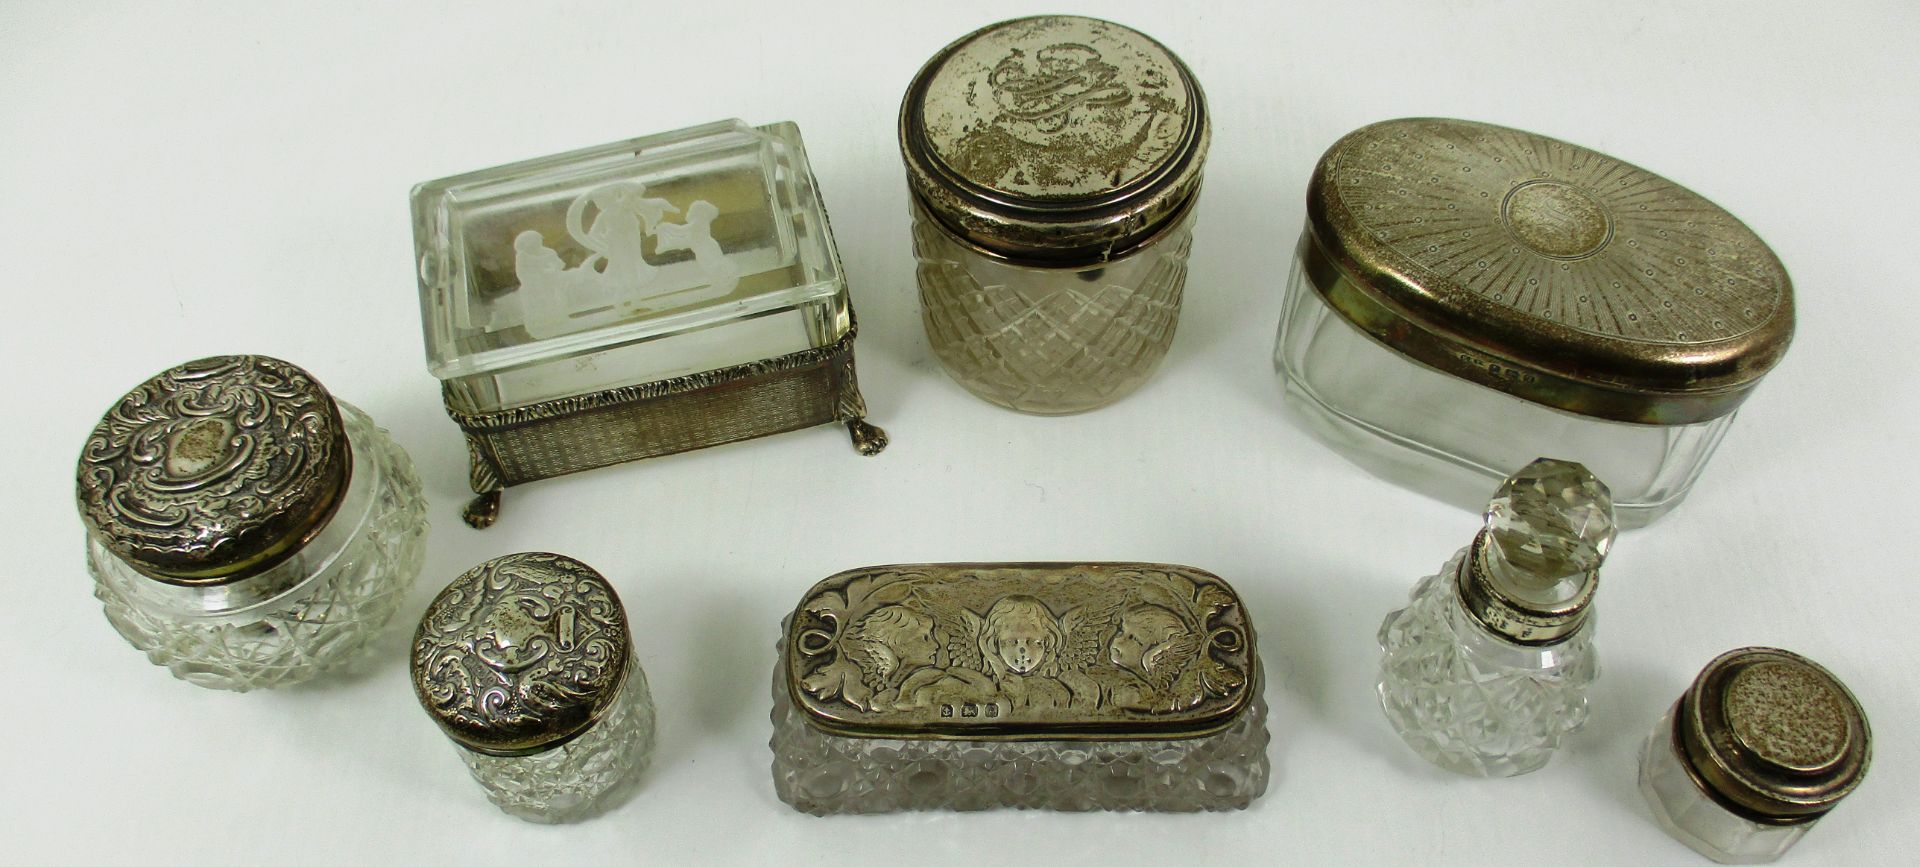 A small cut glass trinket box with silver cover/lid, embossed with cherub design, Birmingham 1906,